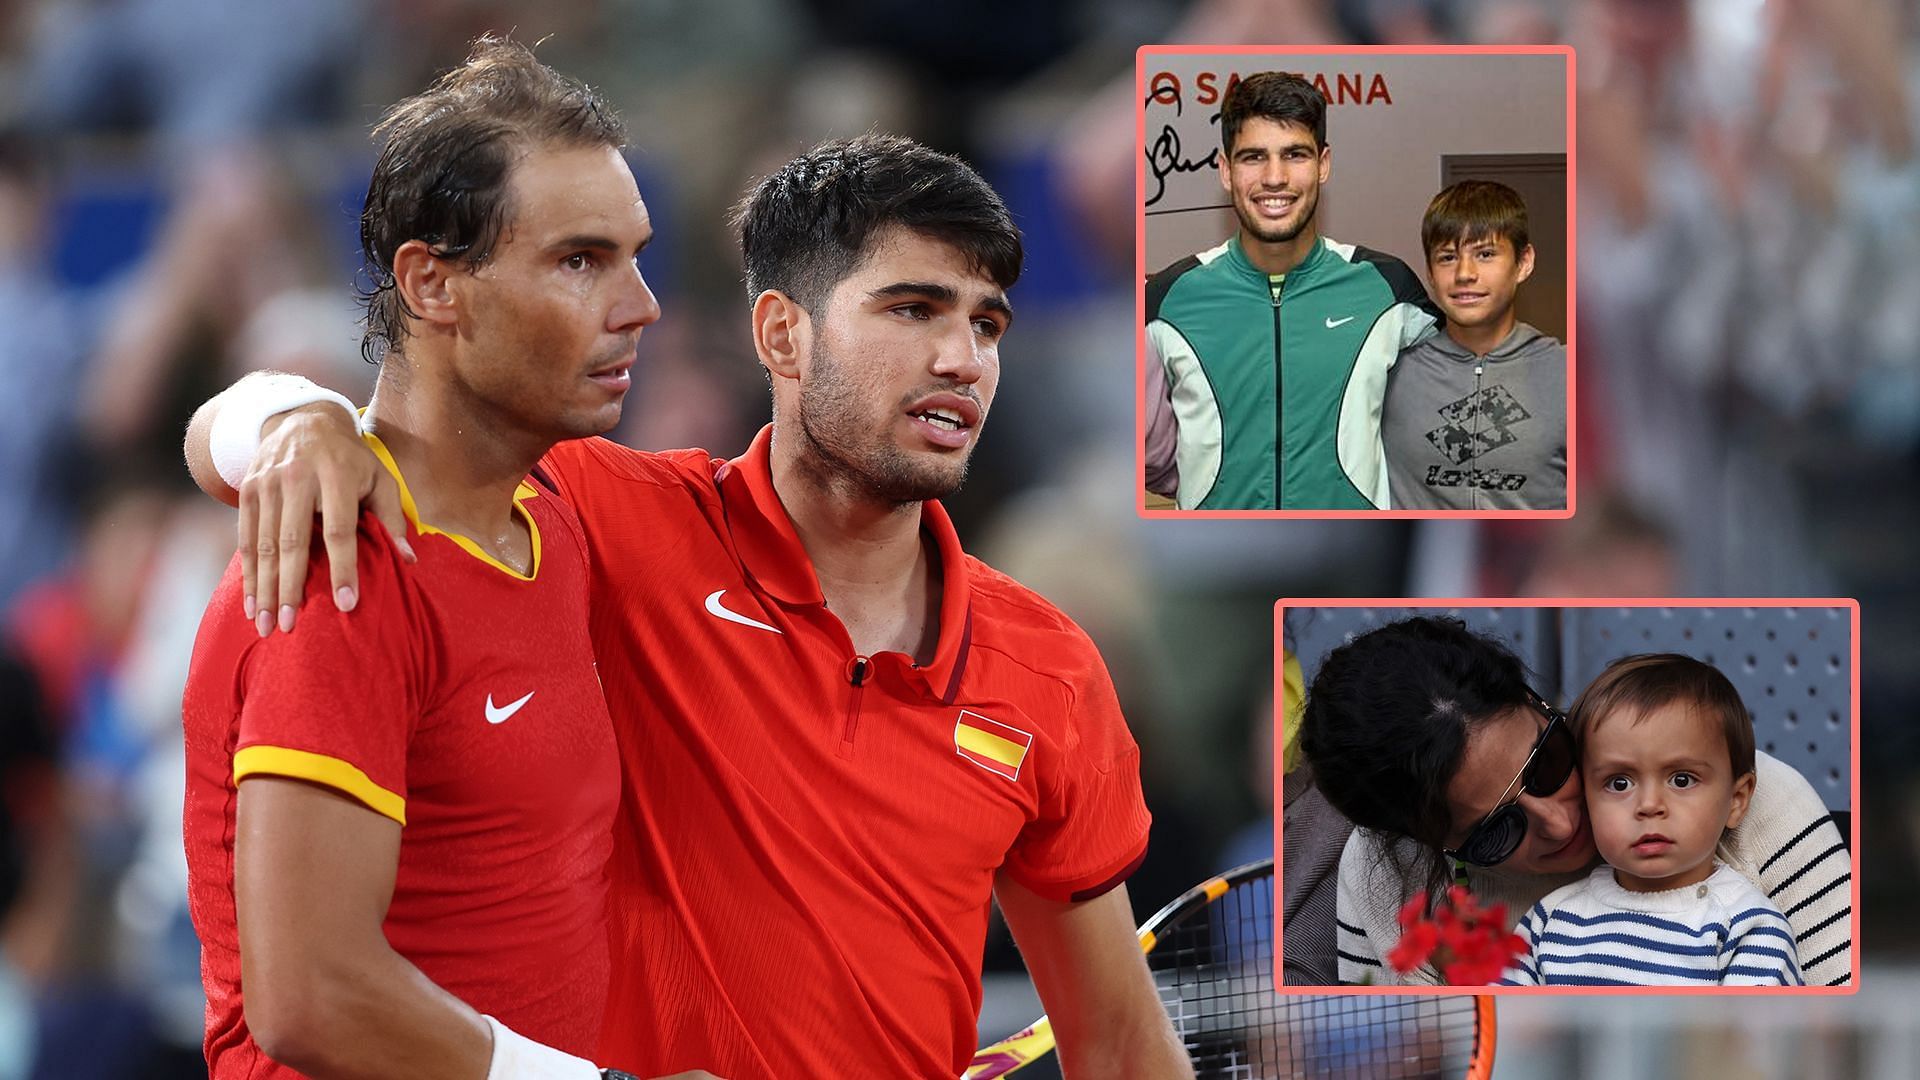 In Pictures: Carlos Alcaraz's brother Jaime sitting next to Rafael Nadal's son goes viral as Spanish duo clinch first win together at Paris Olympics